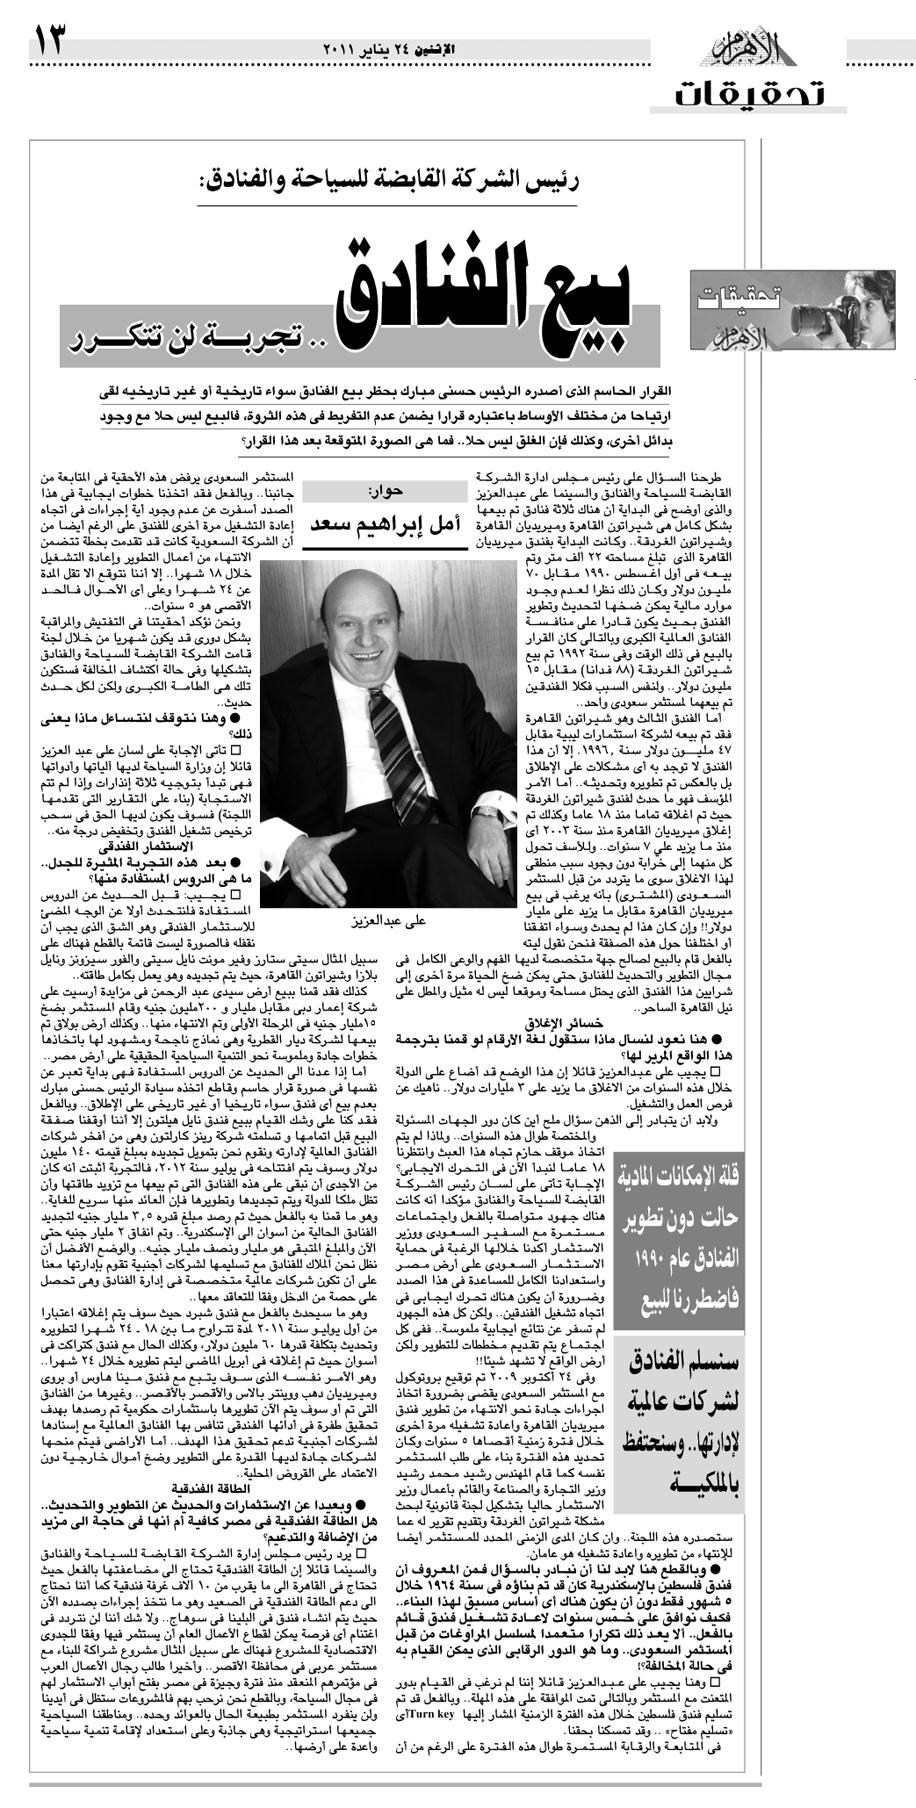 Egypt bans selling hotels to Arabs as reported on page 13 of the Egyptian daily Al-Ahram, January 24, 2011.